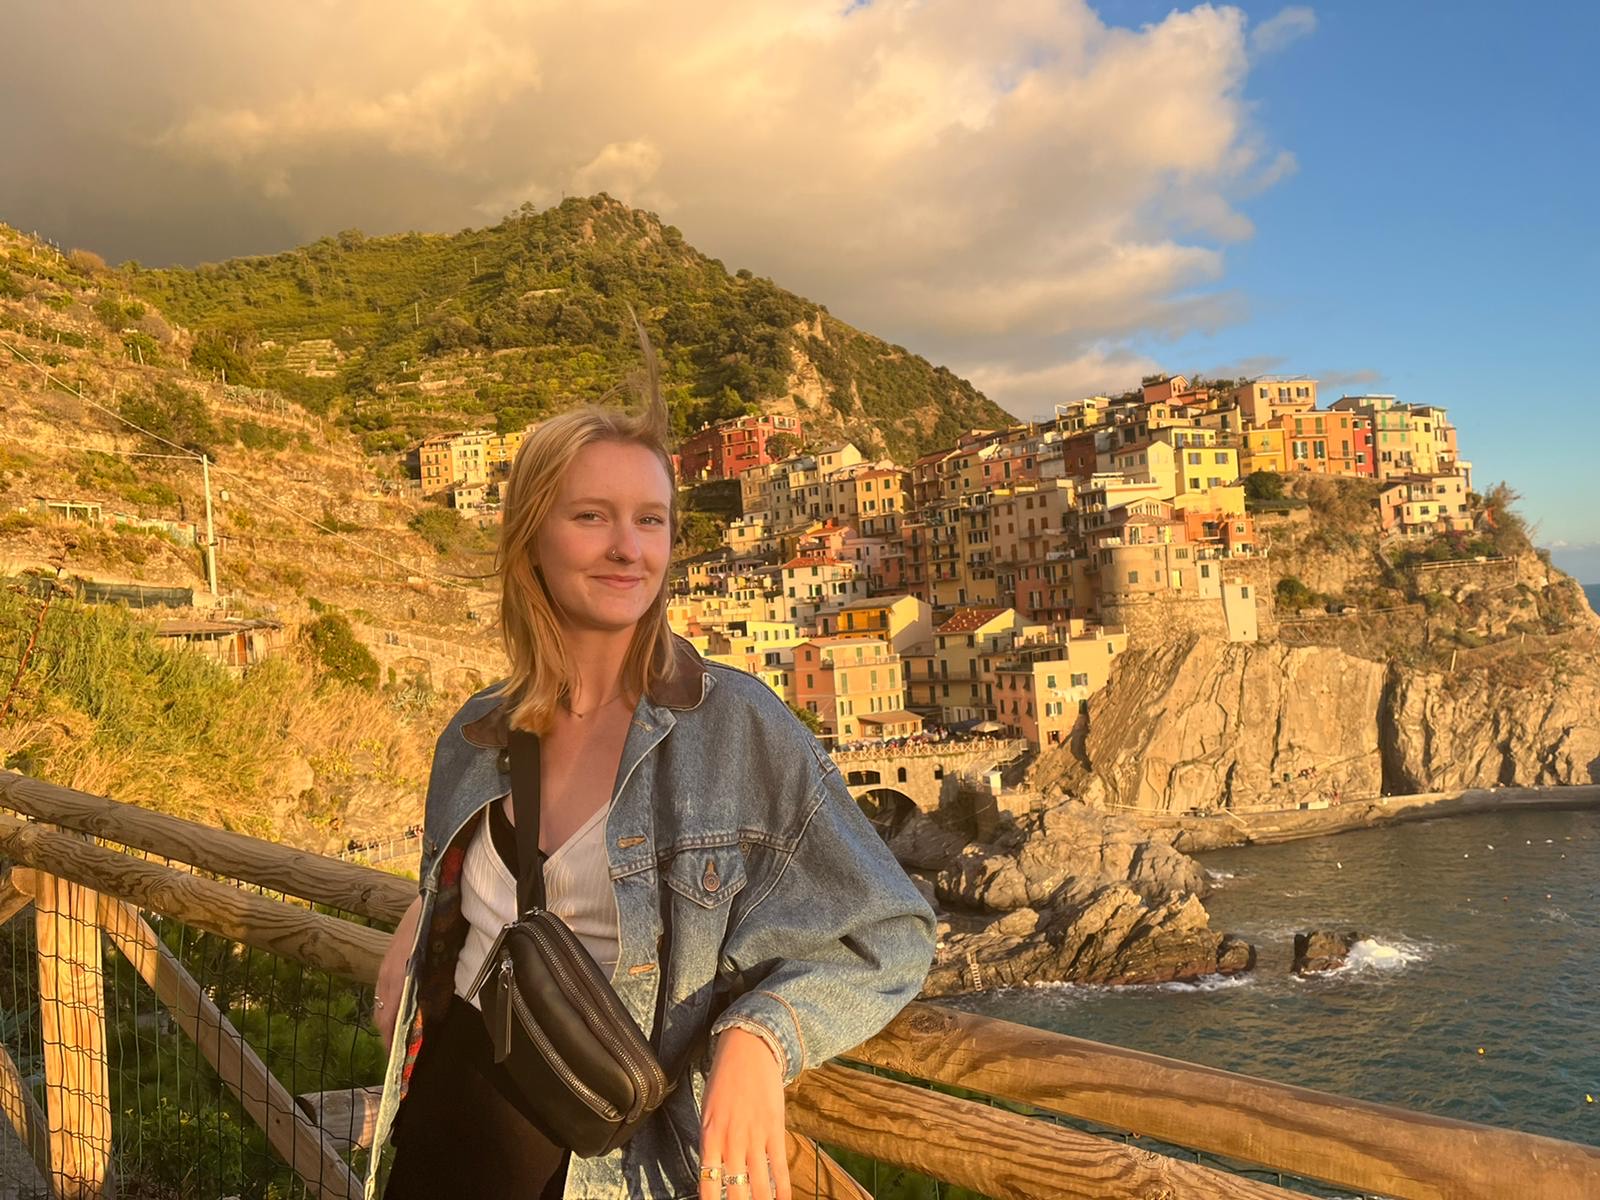 a student studying abroad in France posing in front of a bunch of colorful houses on the cliff above the ocean